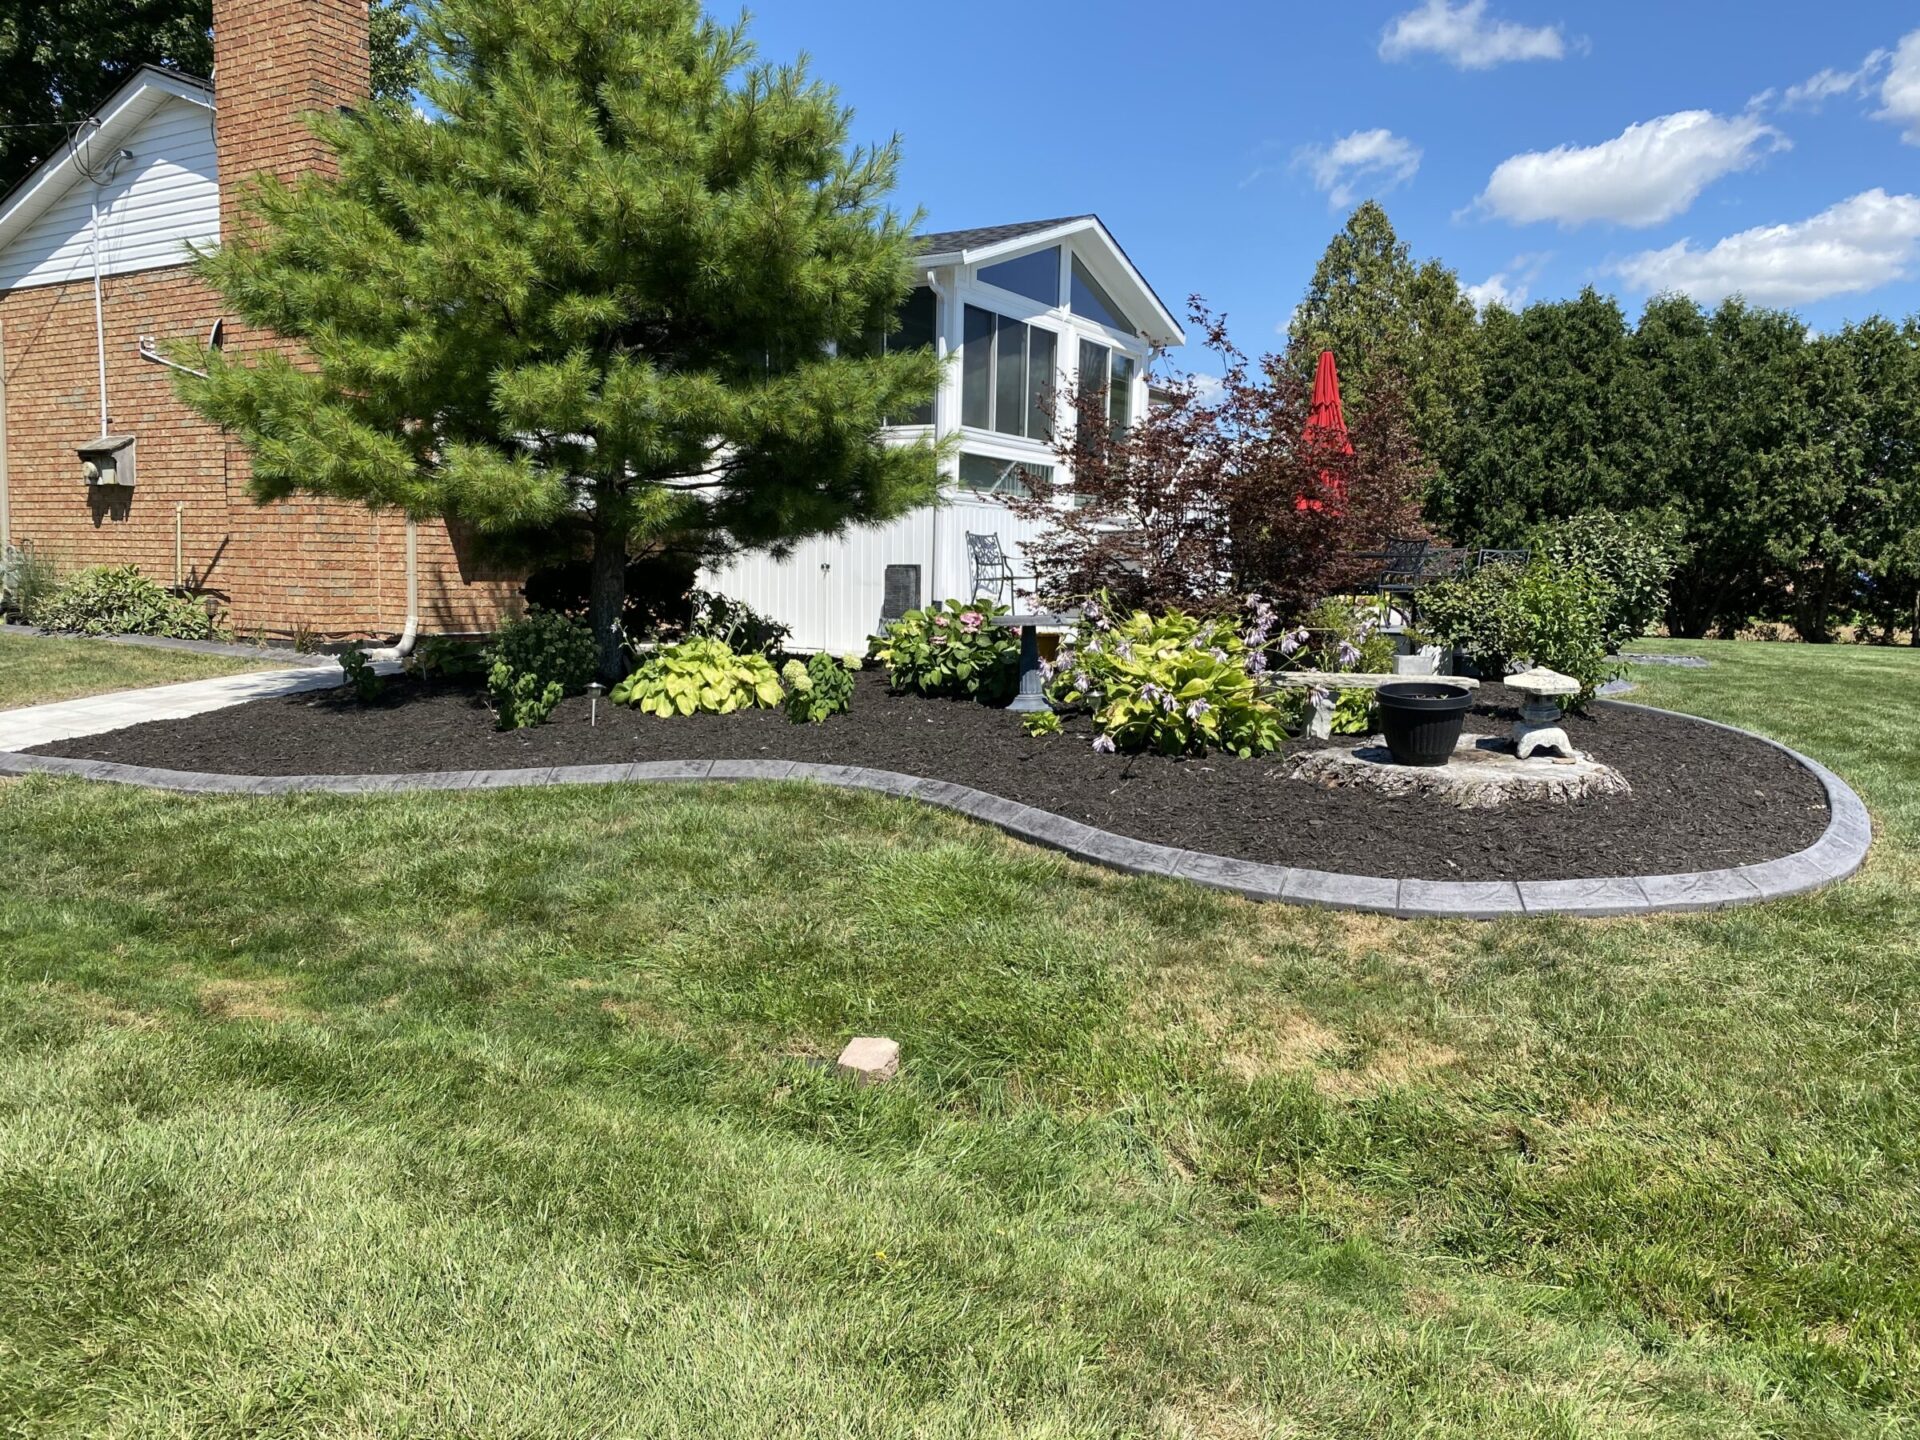 A neatly manicured garden with a curved mulch bed, assorted plants, a tree, and a red wind spinner in front of a home.